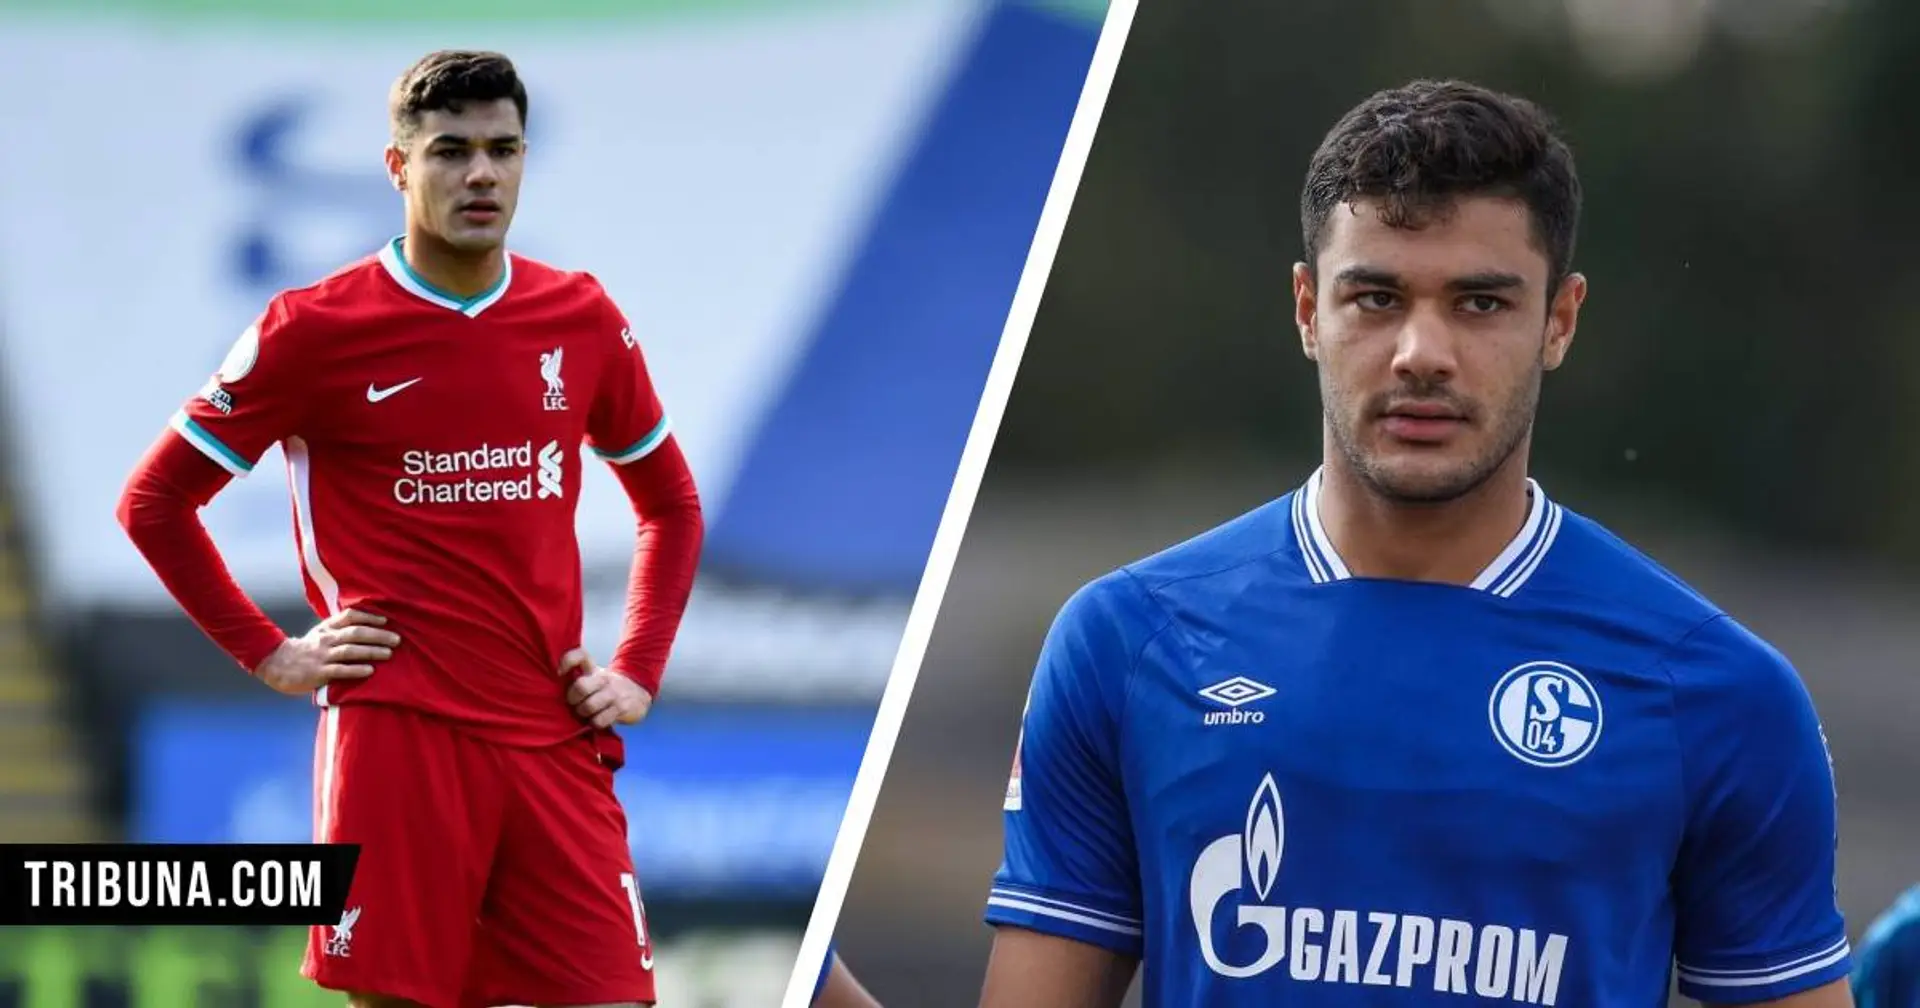 Back to his roots: Ozan Kabak to report back to Schalke after Liverpool decline offer to buy